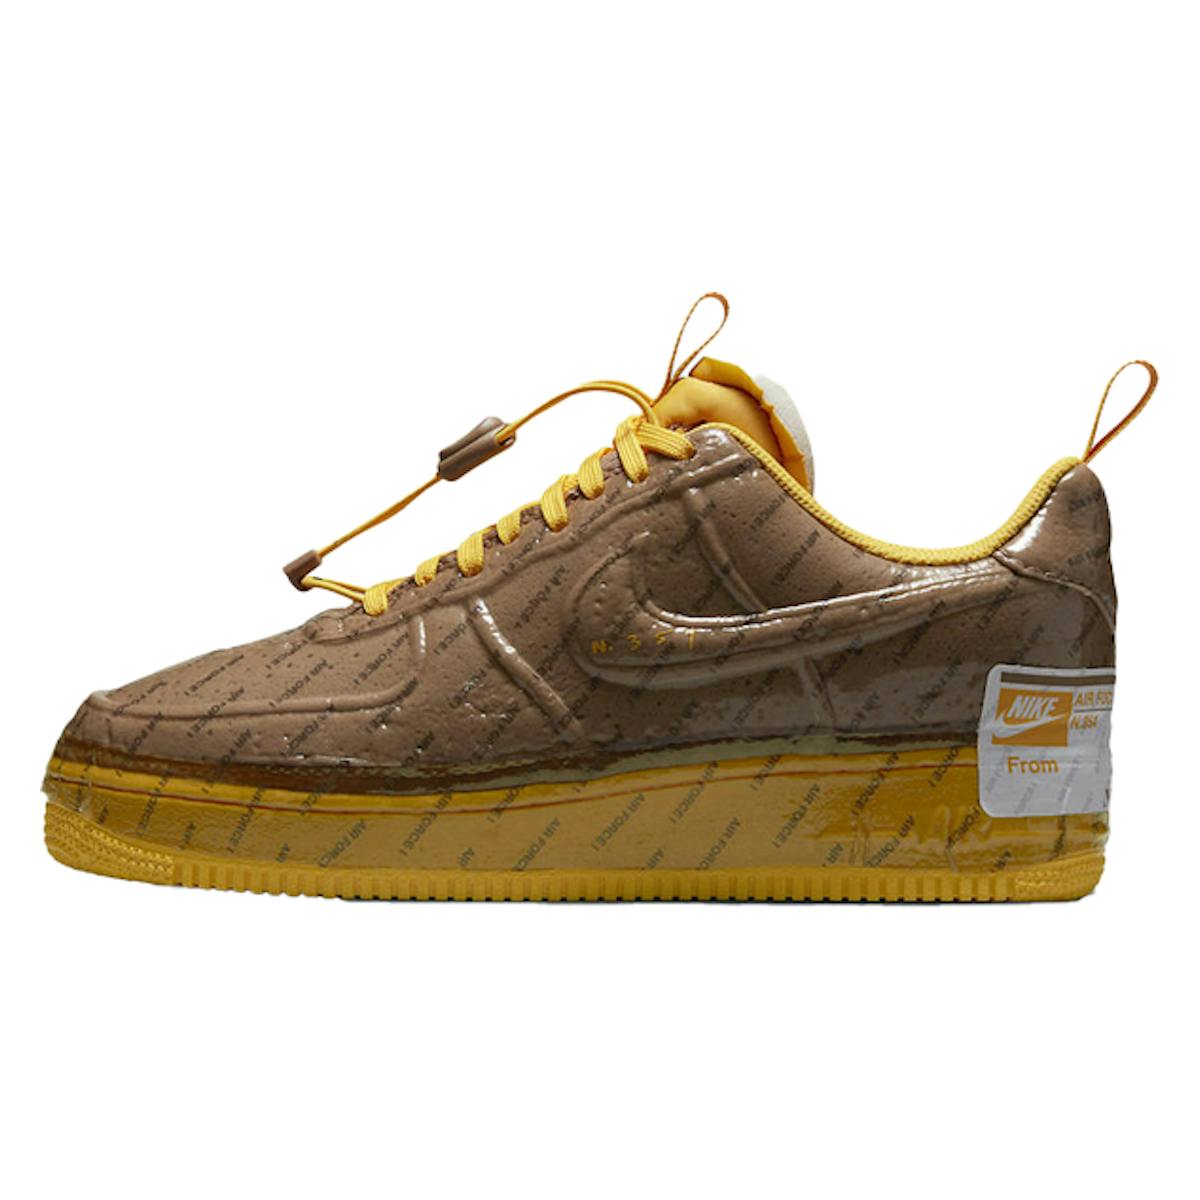 Nike Air Force 1 Experimental "Archaeo"